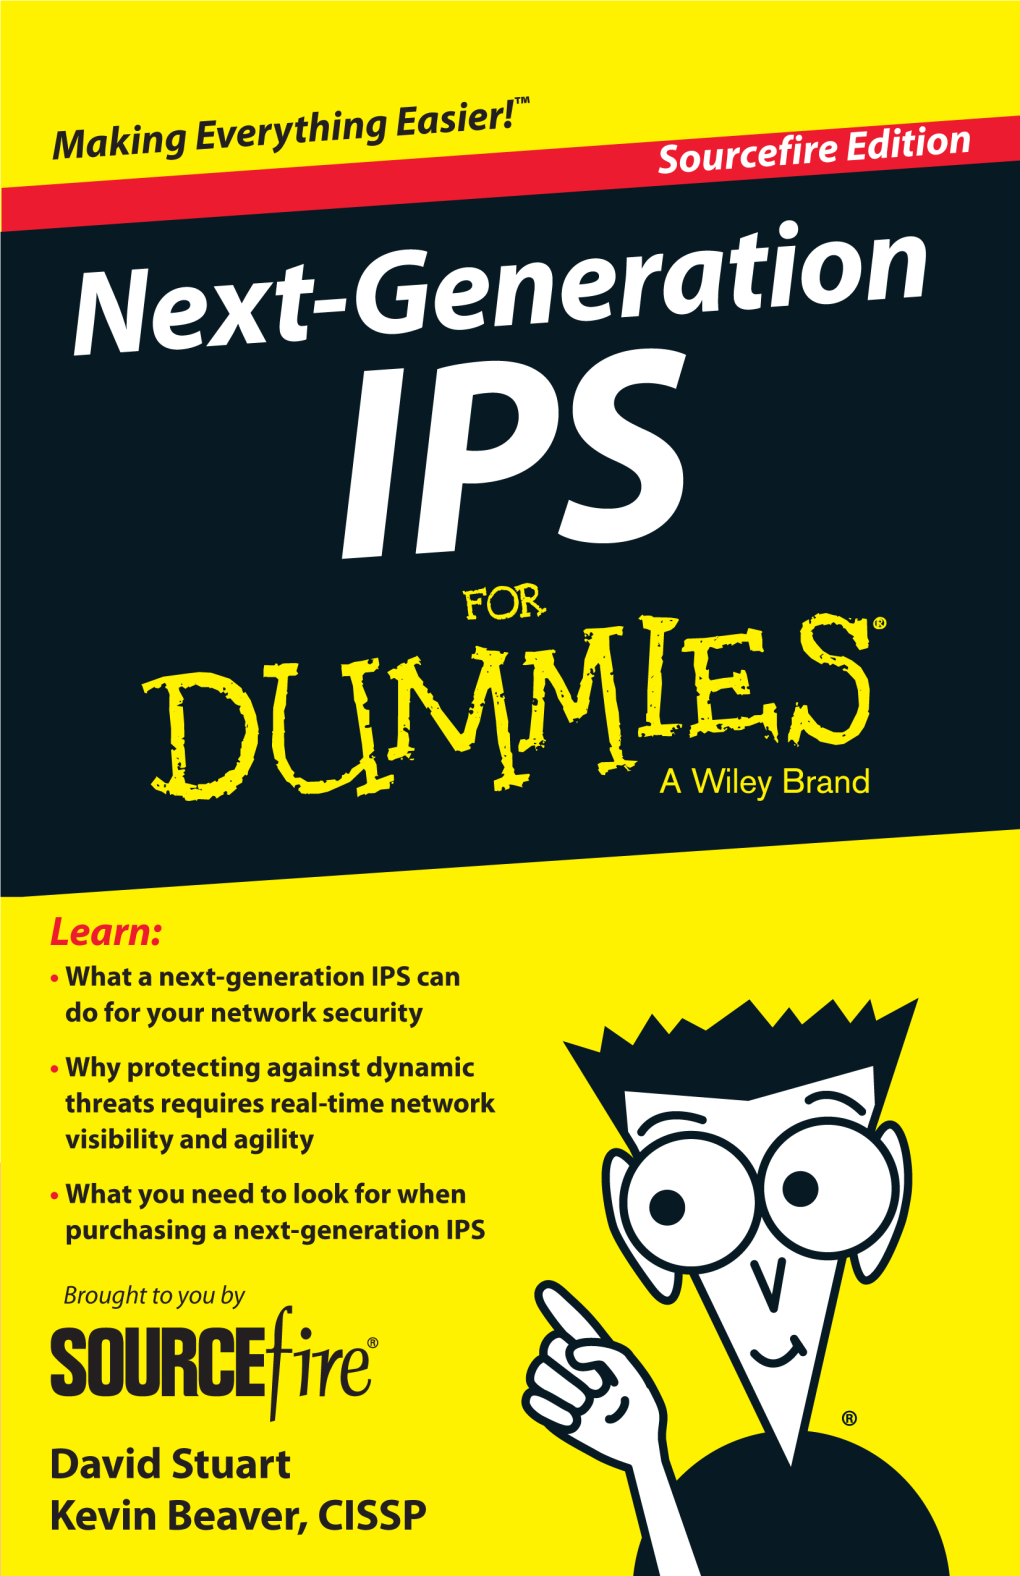 Next-Generation IPS for Dummies®, Sourcefire Edition Published by John Wiley & Sons, Inc